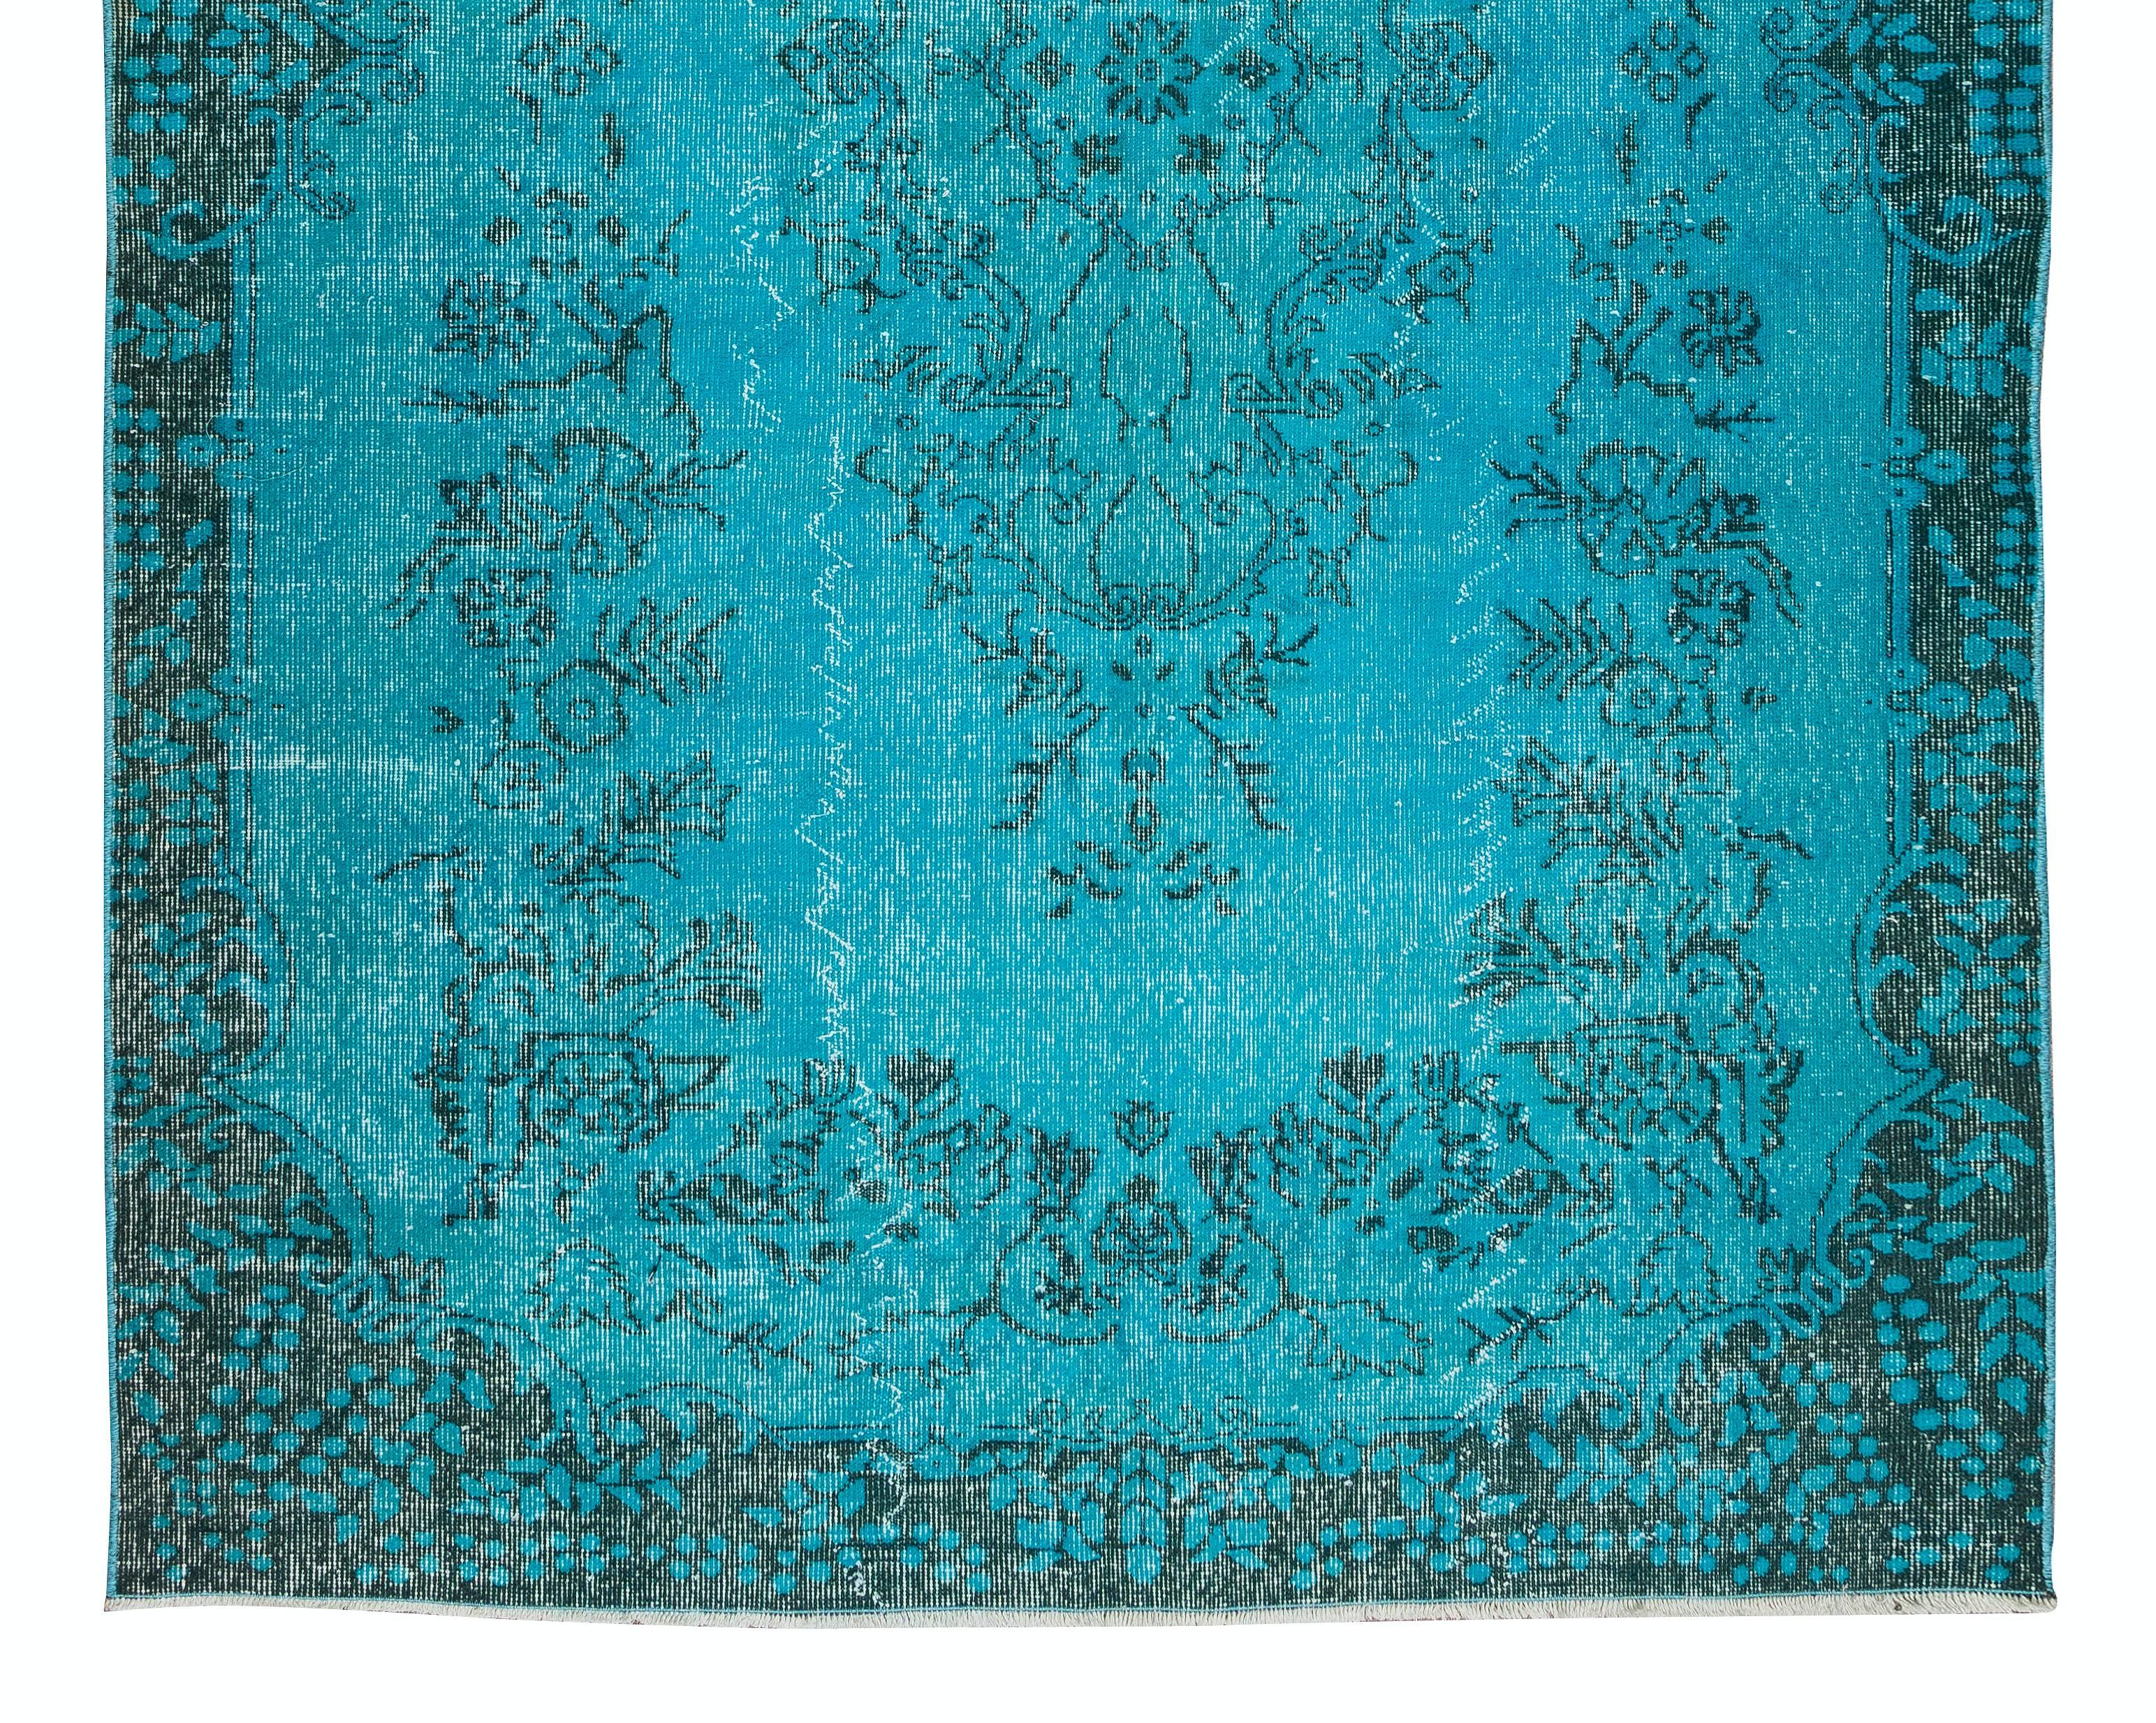 6x9.8 Ft Vintage Handmade Turkish Rug Over-Dyed in Teal Blue 4 Modern Interiors In Good Condition For Sale In Philadelphia, PA